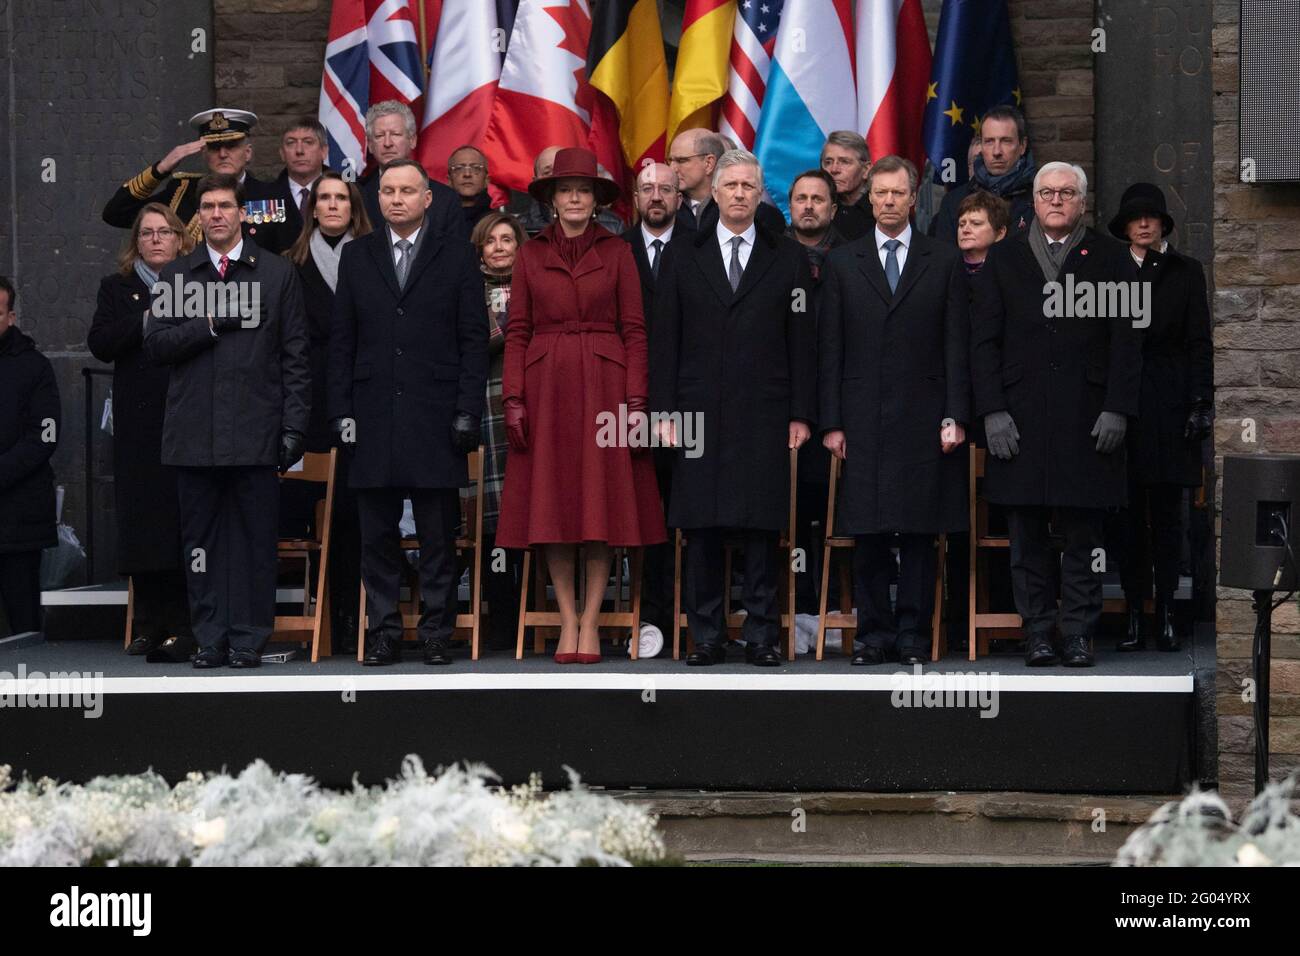 Reportage:  Defense Secretary Mark T. Esper leads the U.S. presidential delegation at the ceremony for the 75th anniversary of the Battle of the Bulge, at the Mardasson Memorial, Bastogne, Belgium, Dec. 16, 2019. Stock Photo